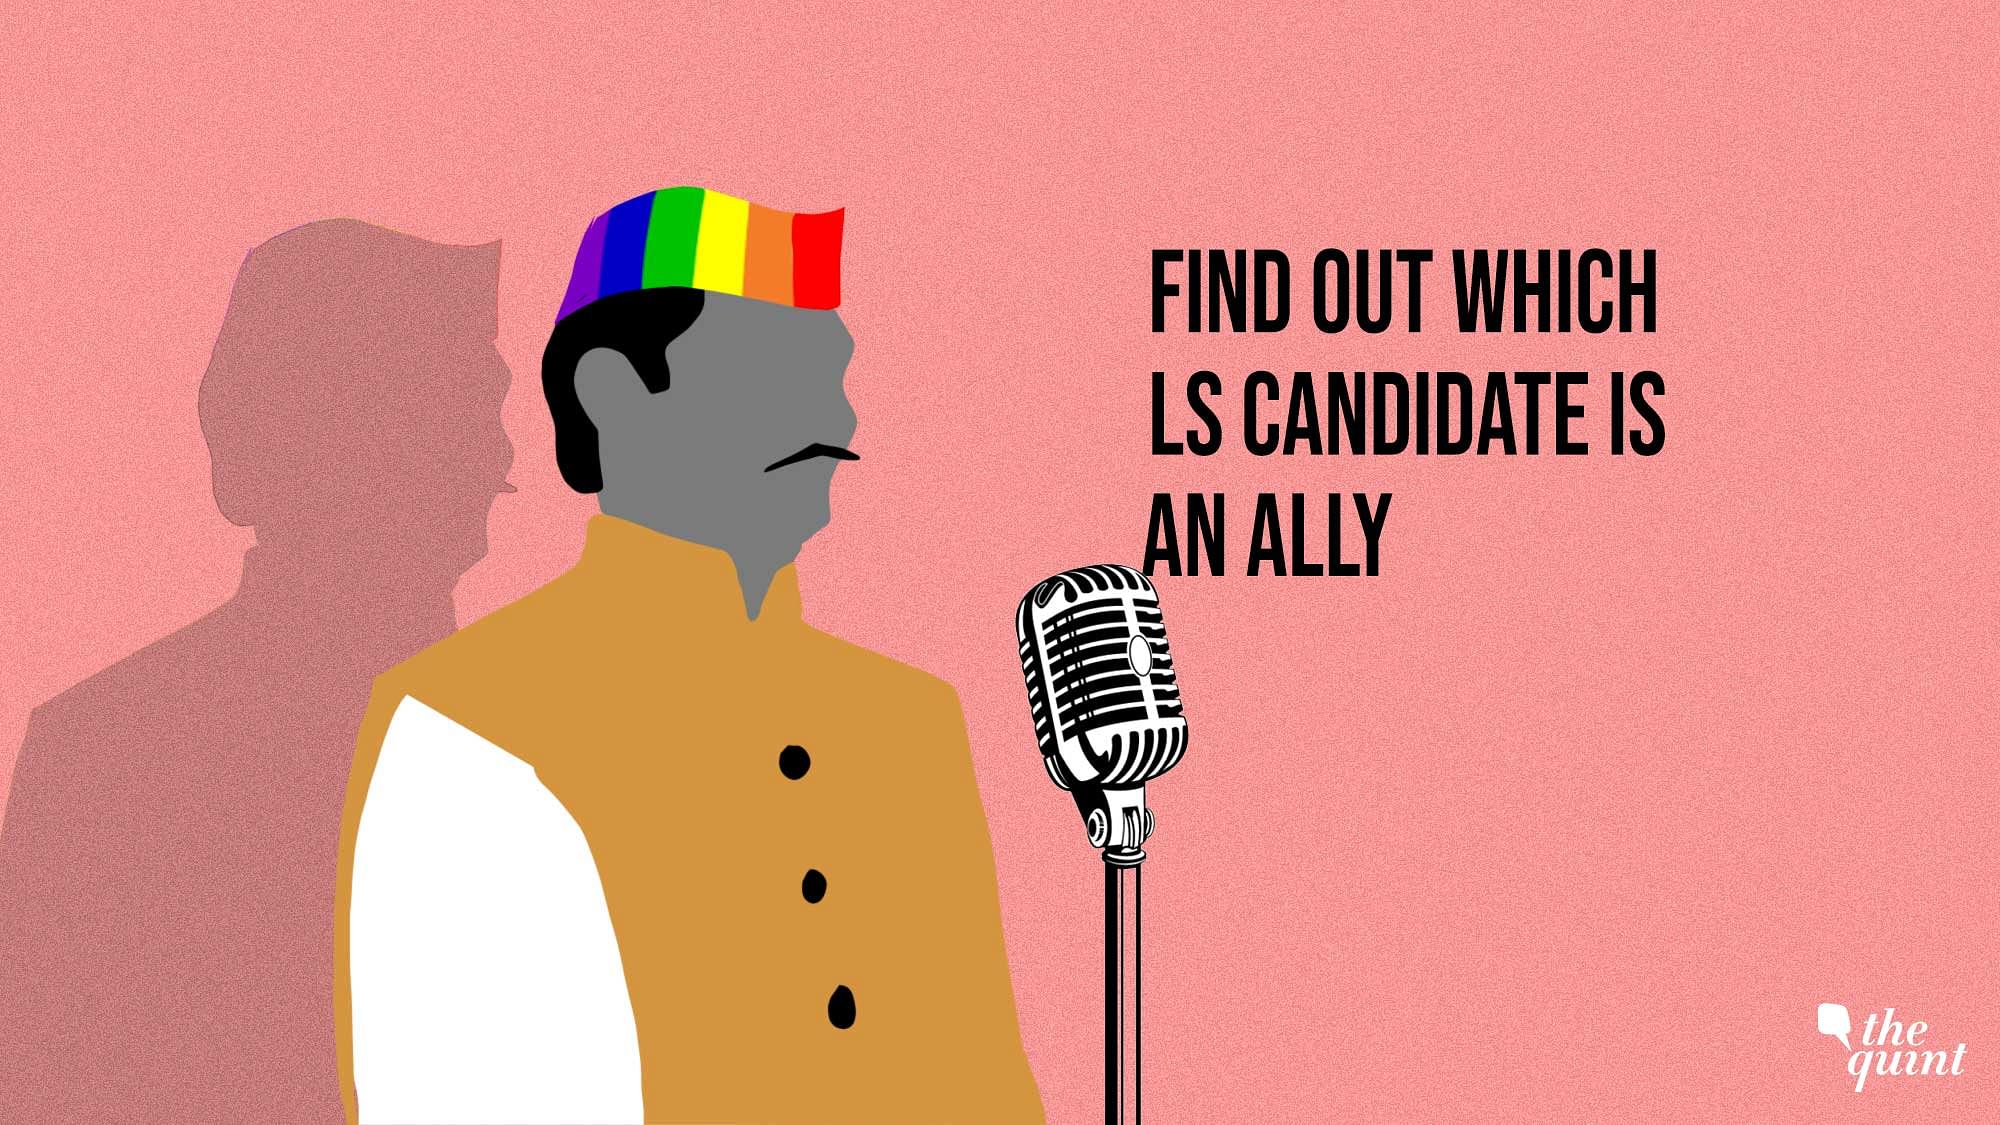 Find out which Lok Sabha Candidate supports queer issues.